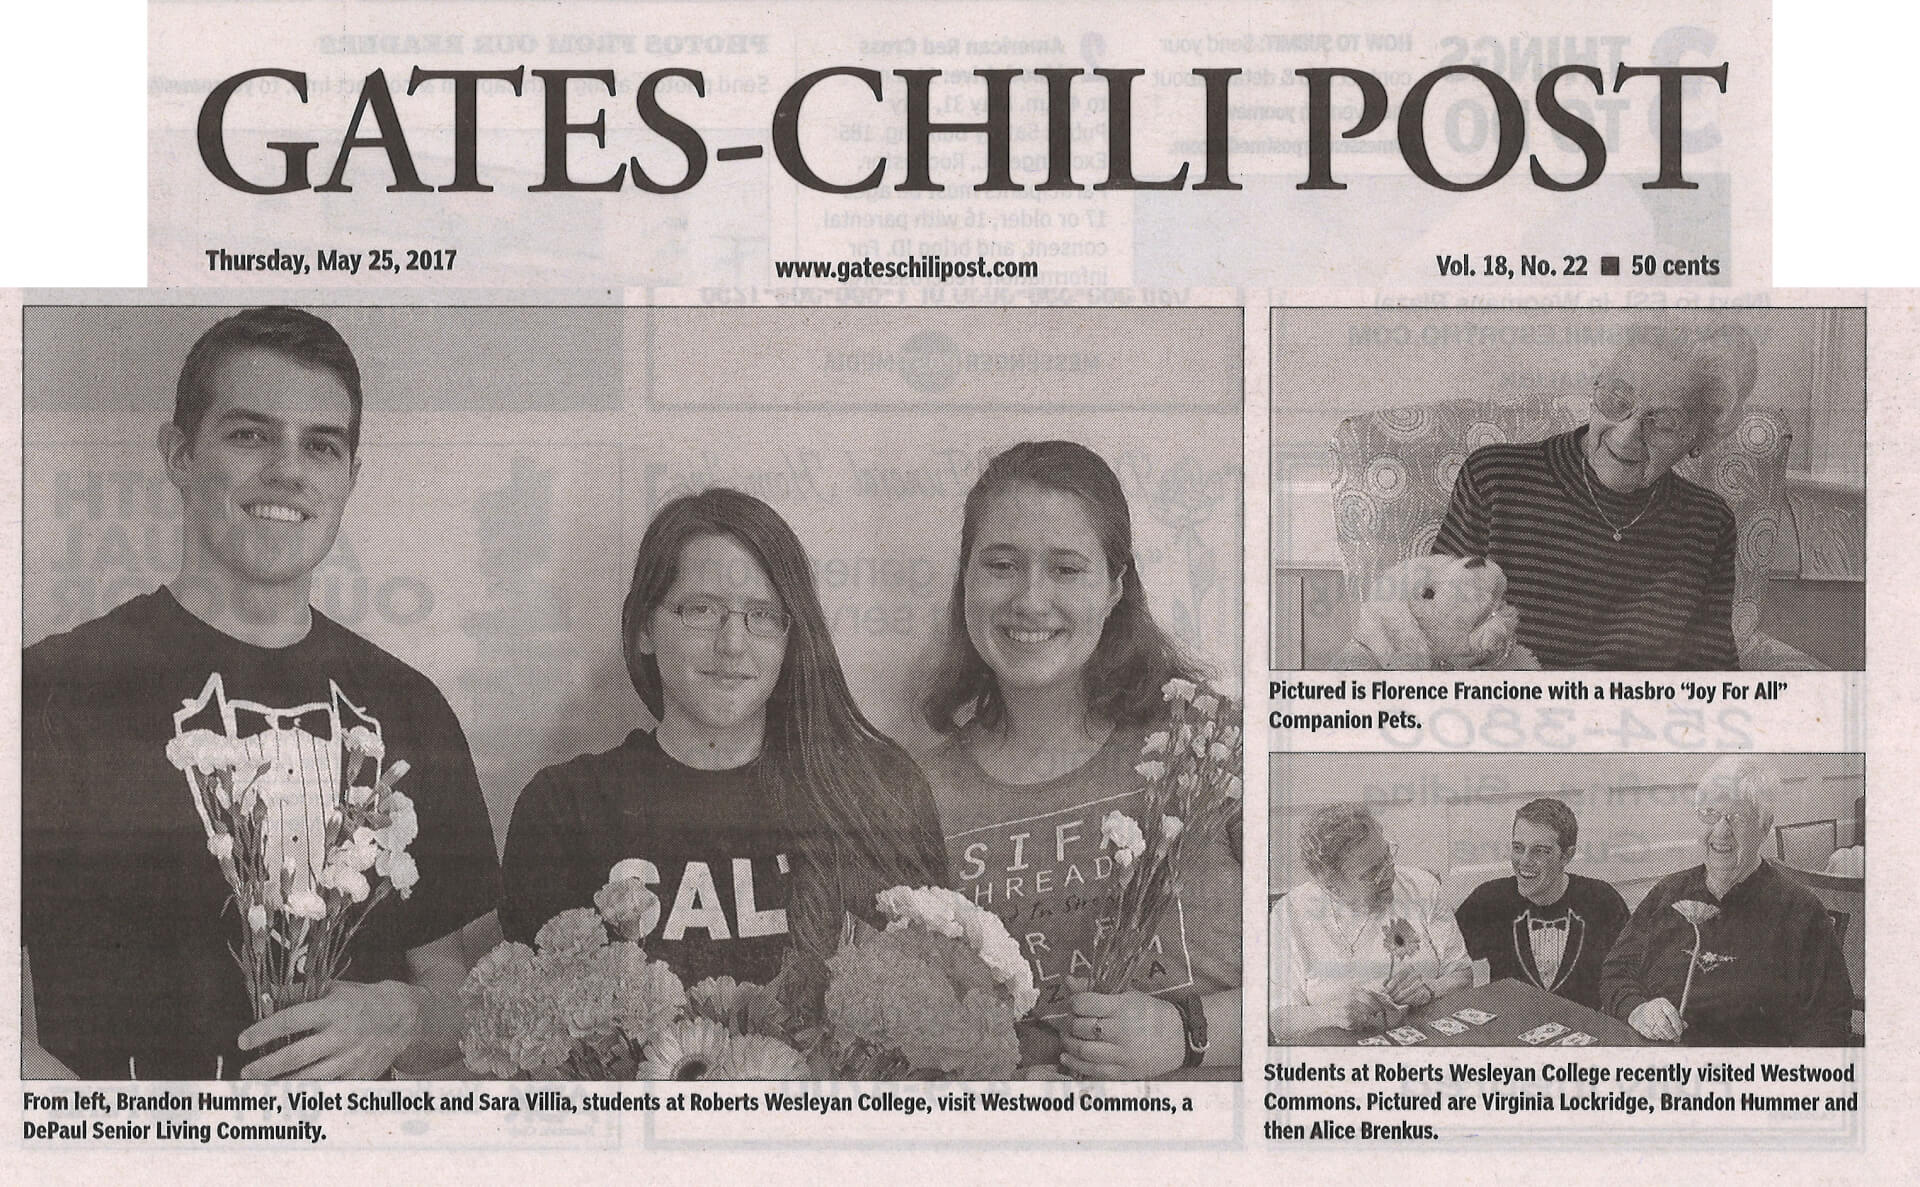 Westwood Commons receives visit from Comfort Companion Pets and local students, photos in the Gates-Chili Post May 25, 2017